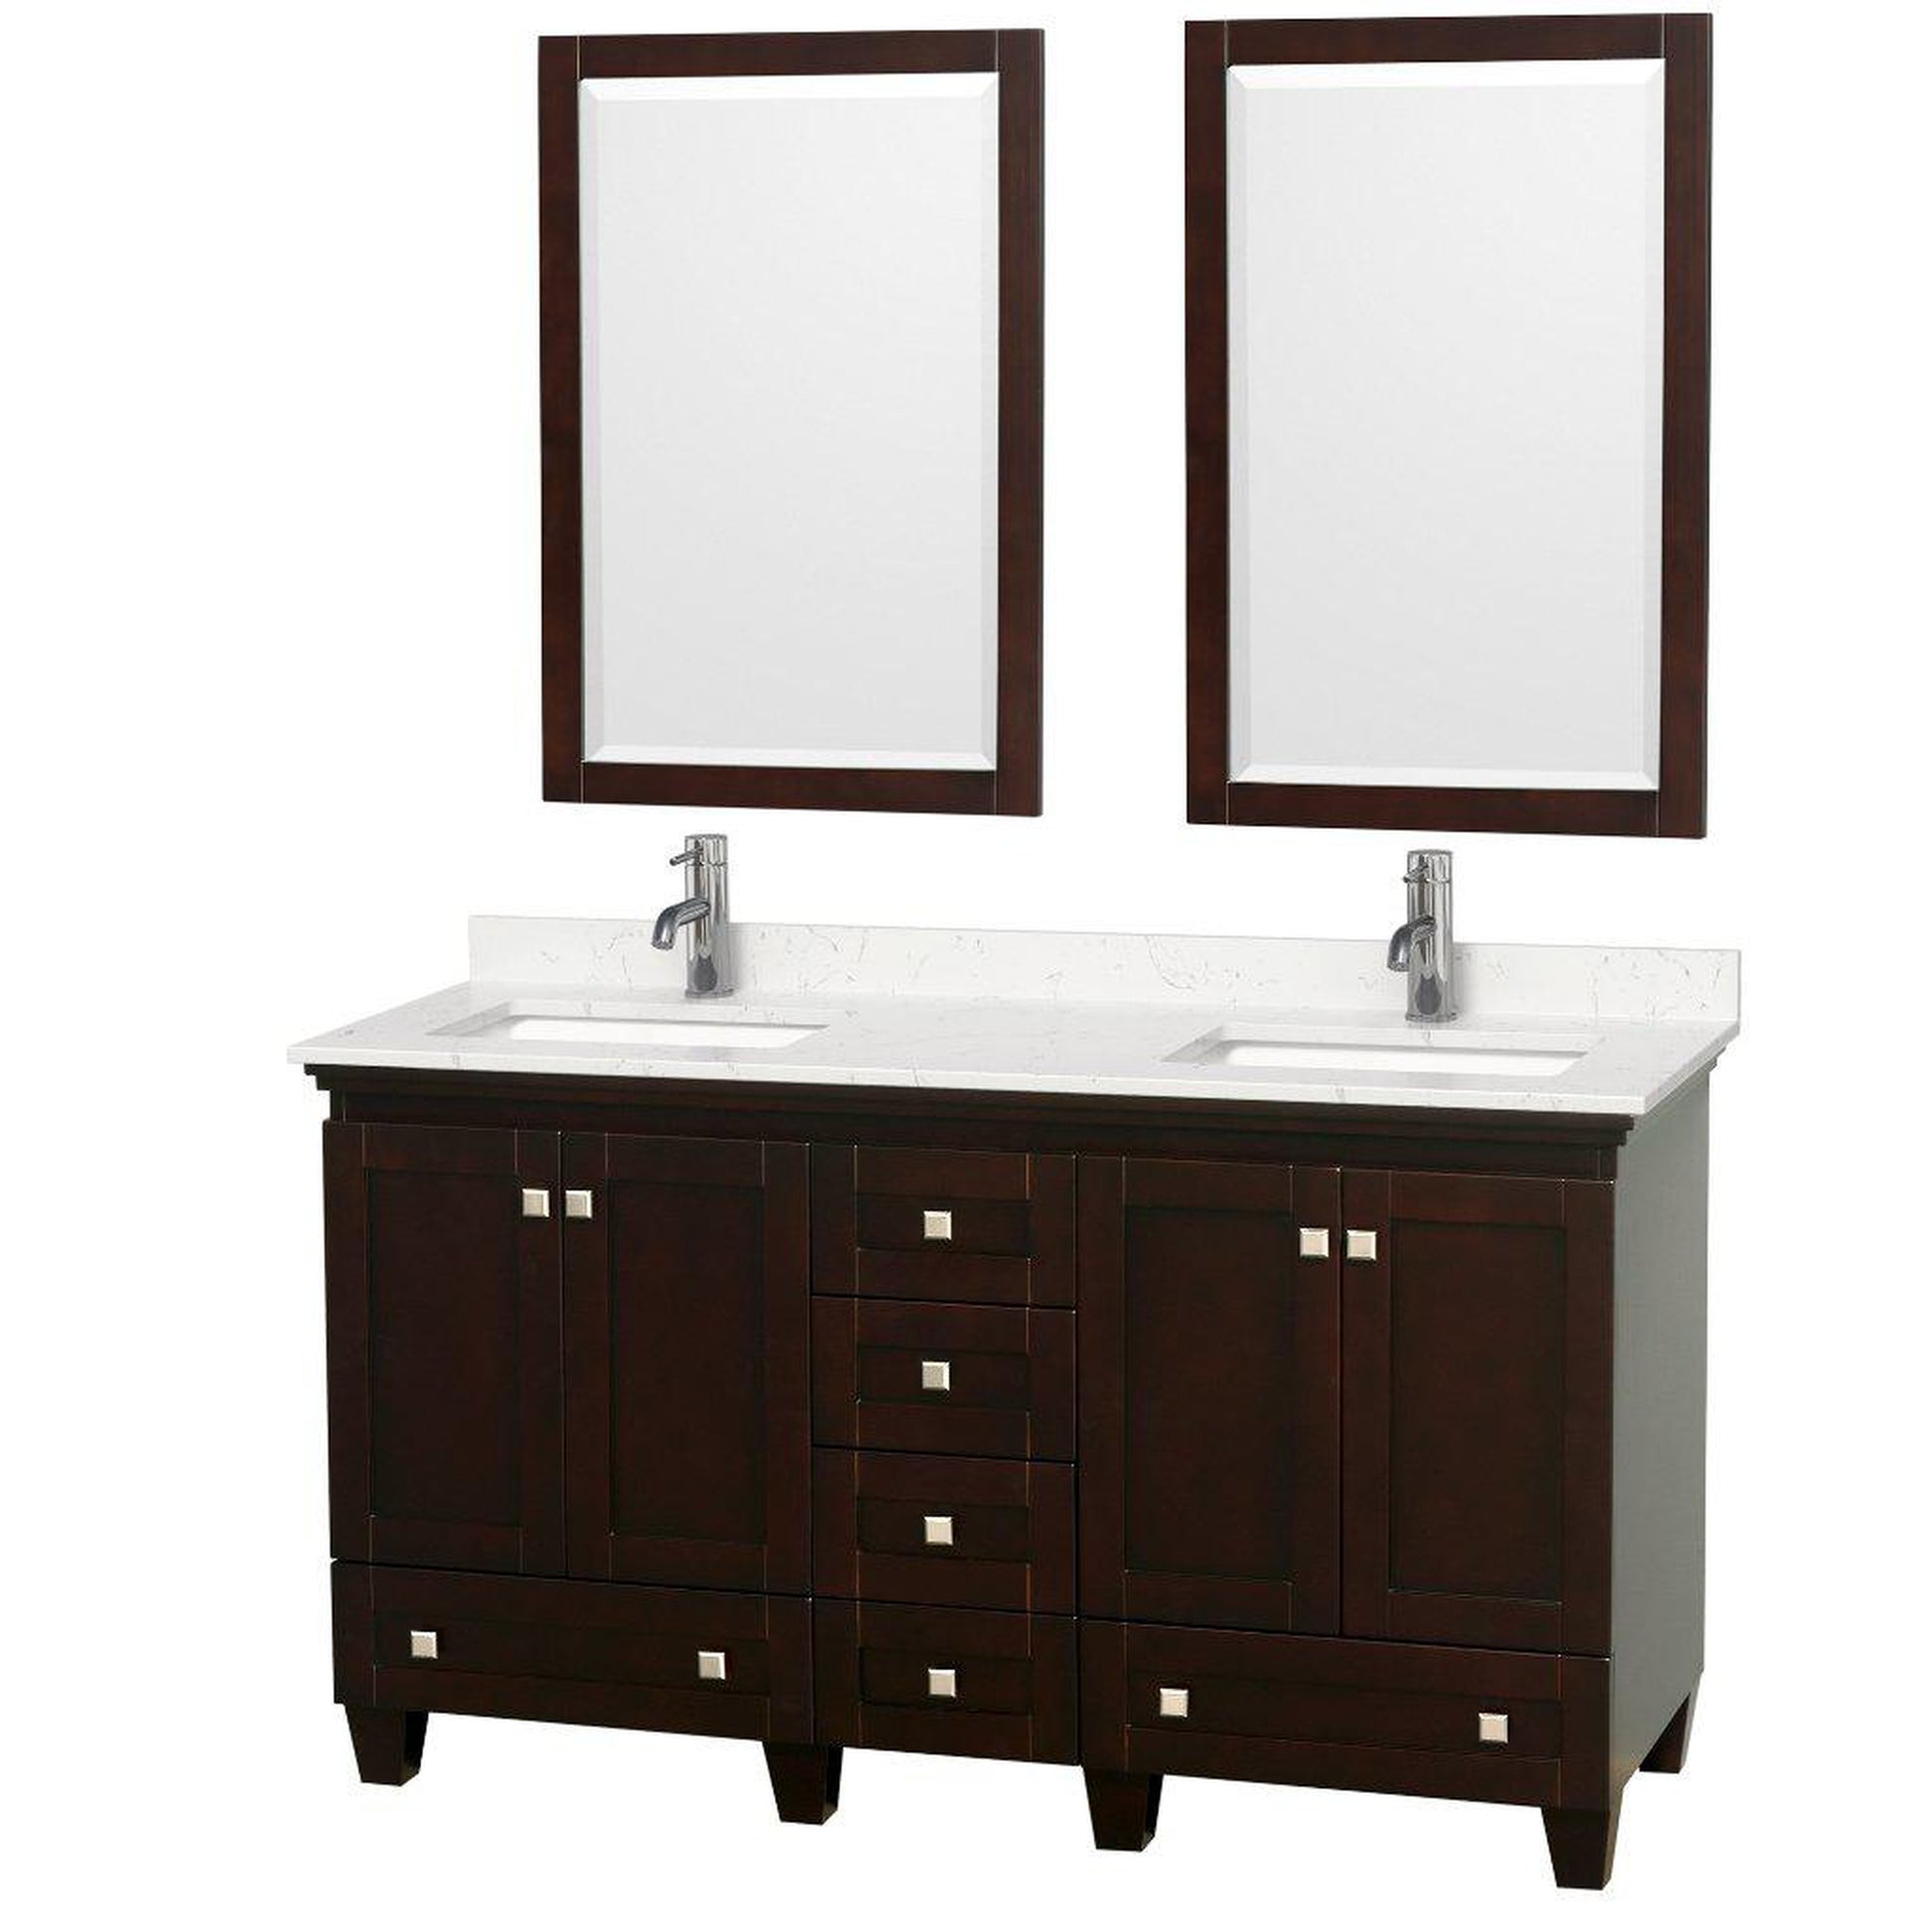 Wyndham Collection Acclaim 60" Double Bathroom Espresso Vanity With Light-Vein Carrara Cultured Marble Countertop And Undermount Square Sinks And 2 Set Of 24" Mirror